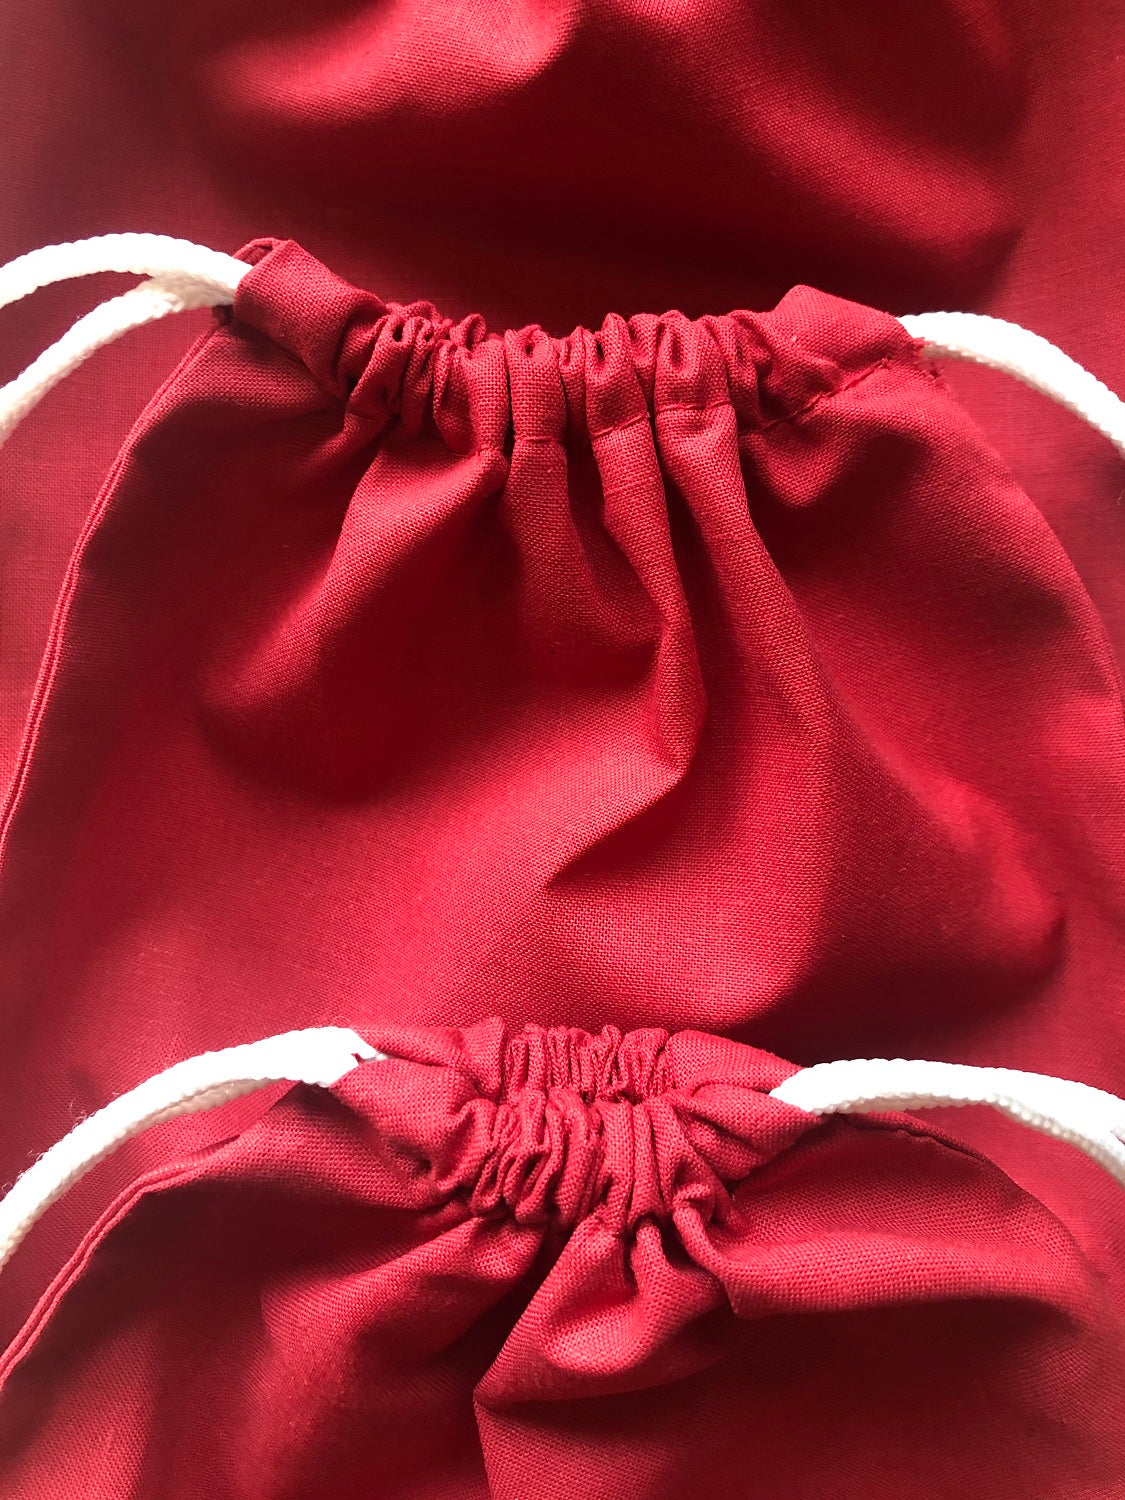 8x12 Inches Reusable Eco-Friendly Cotton Double Drawstring Bags Red Color